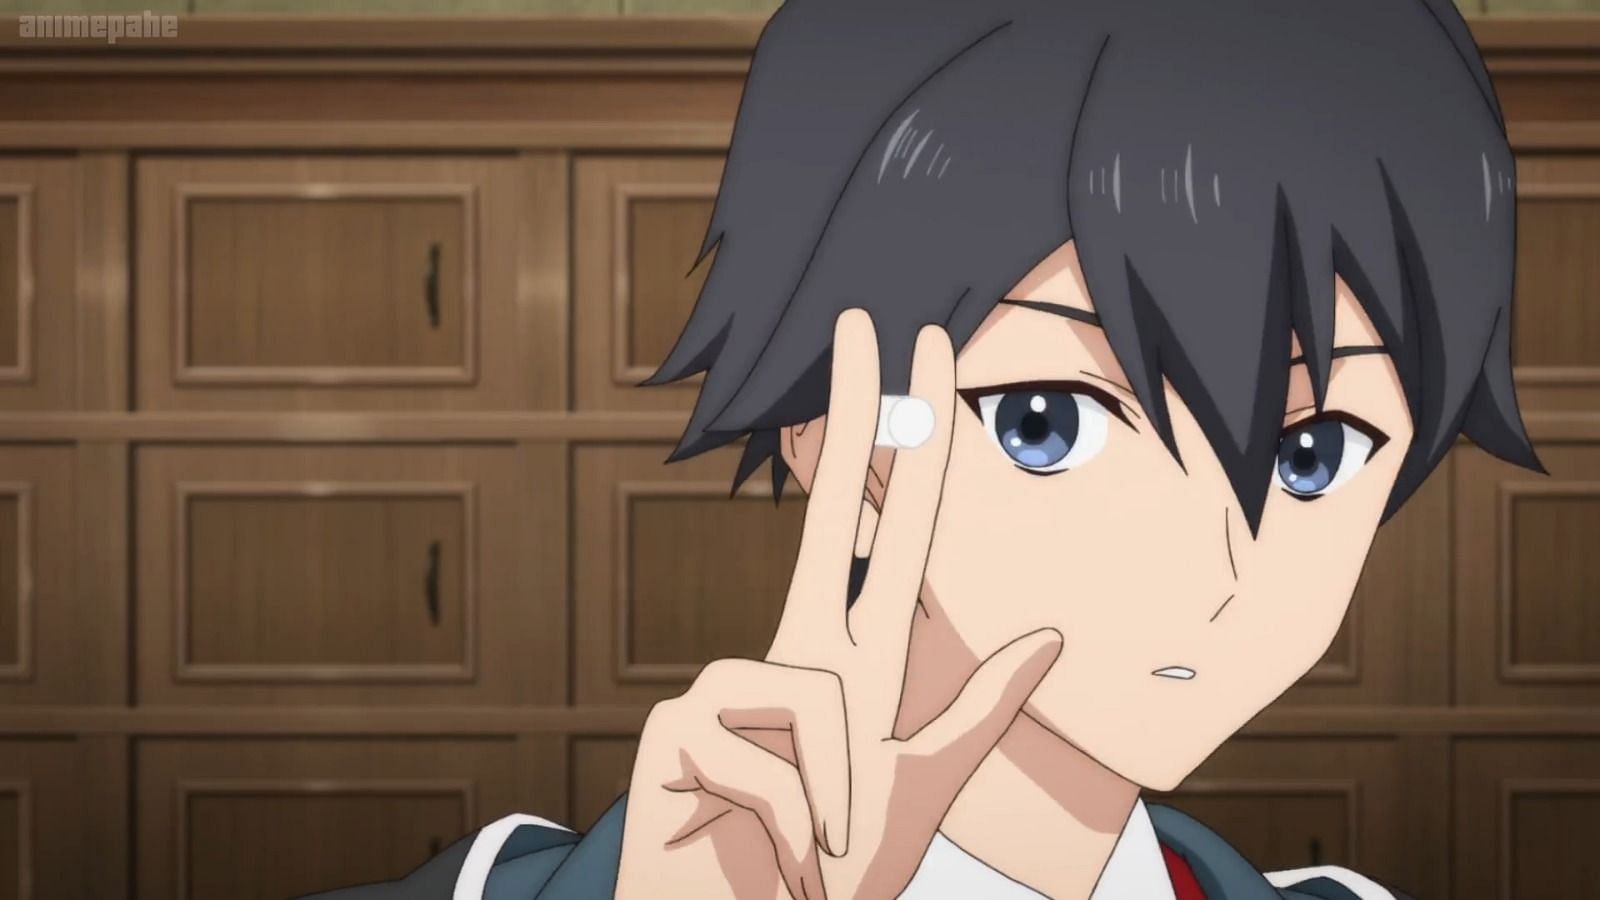 Ray White as seen in the anime. (image via Cloud Hearts)